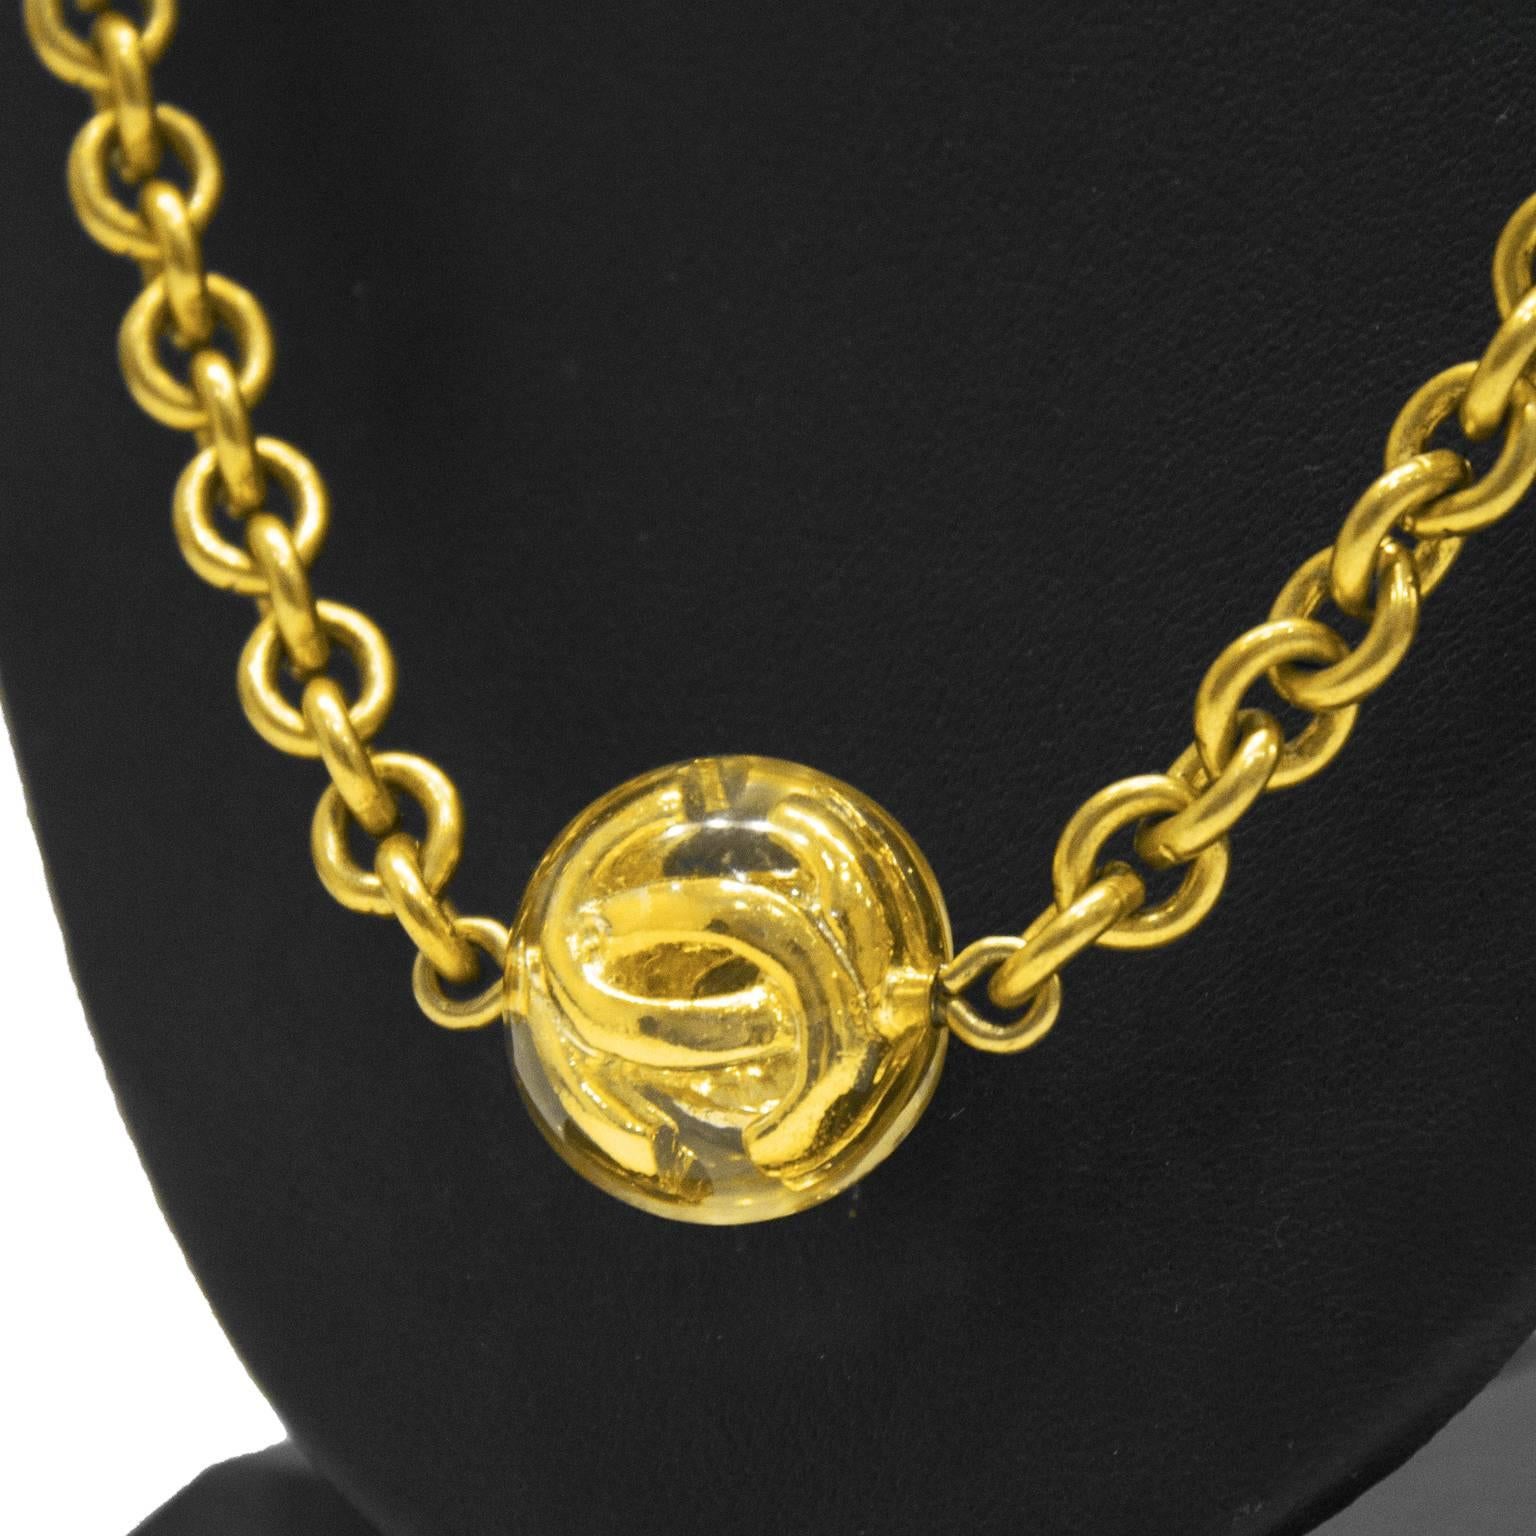 Dazzle with this fabulous Chanel gold plate chain necklace from the year 1990. Features transparent plexi-resin spheres along the chain, all with the floating Chanel CC logo inside. Spring ring clasp closure. Excellent vintage condition. 

Sphere